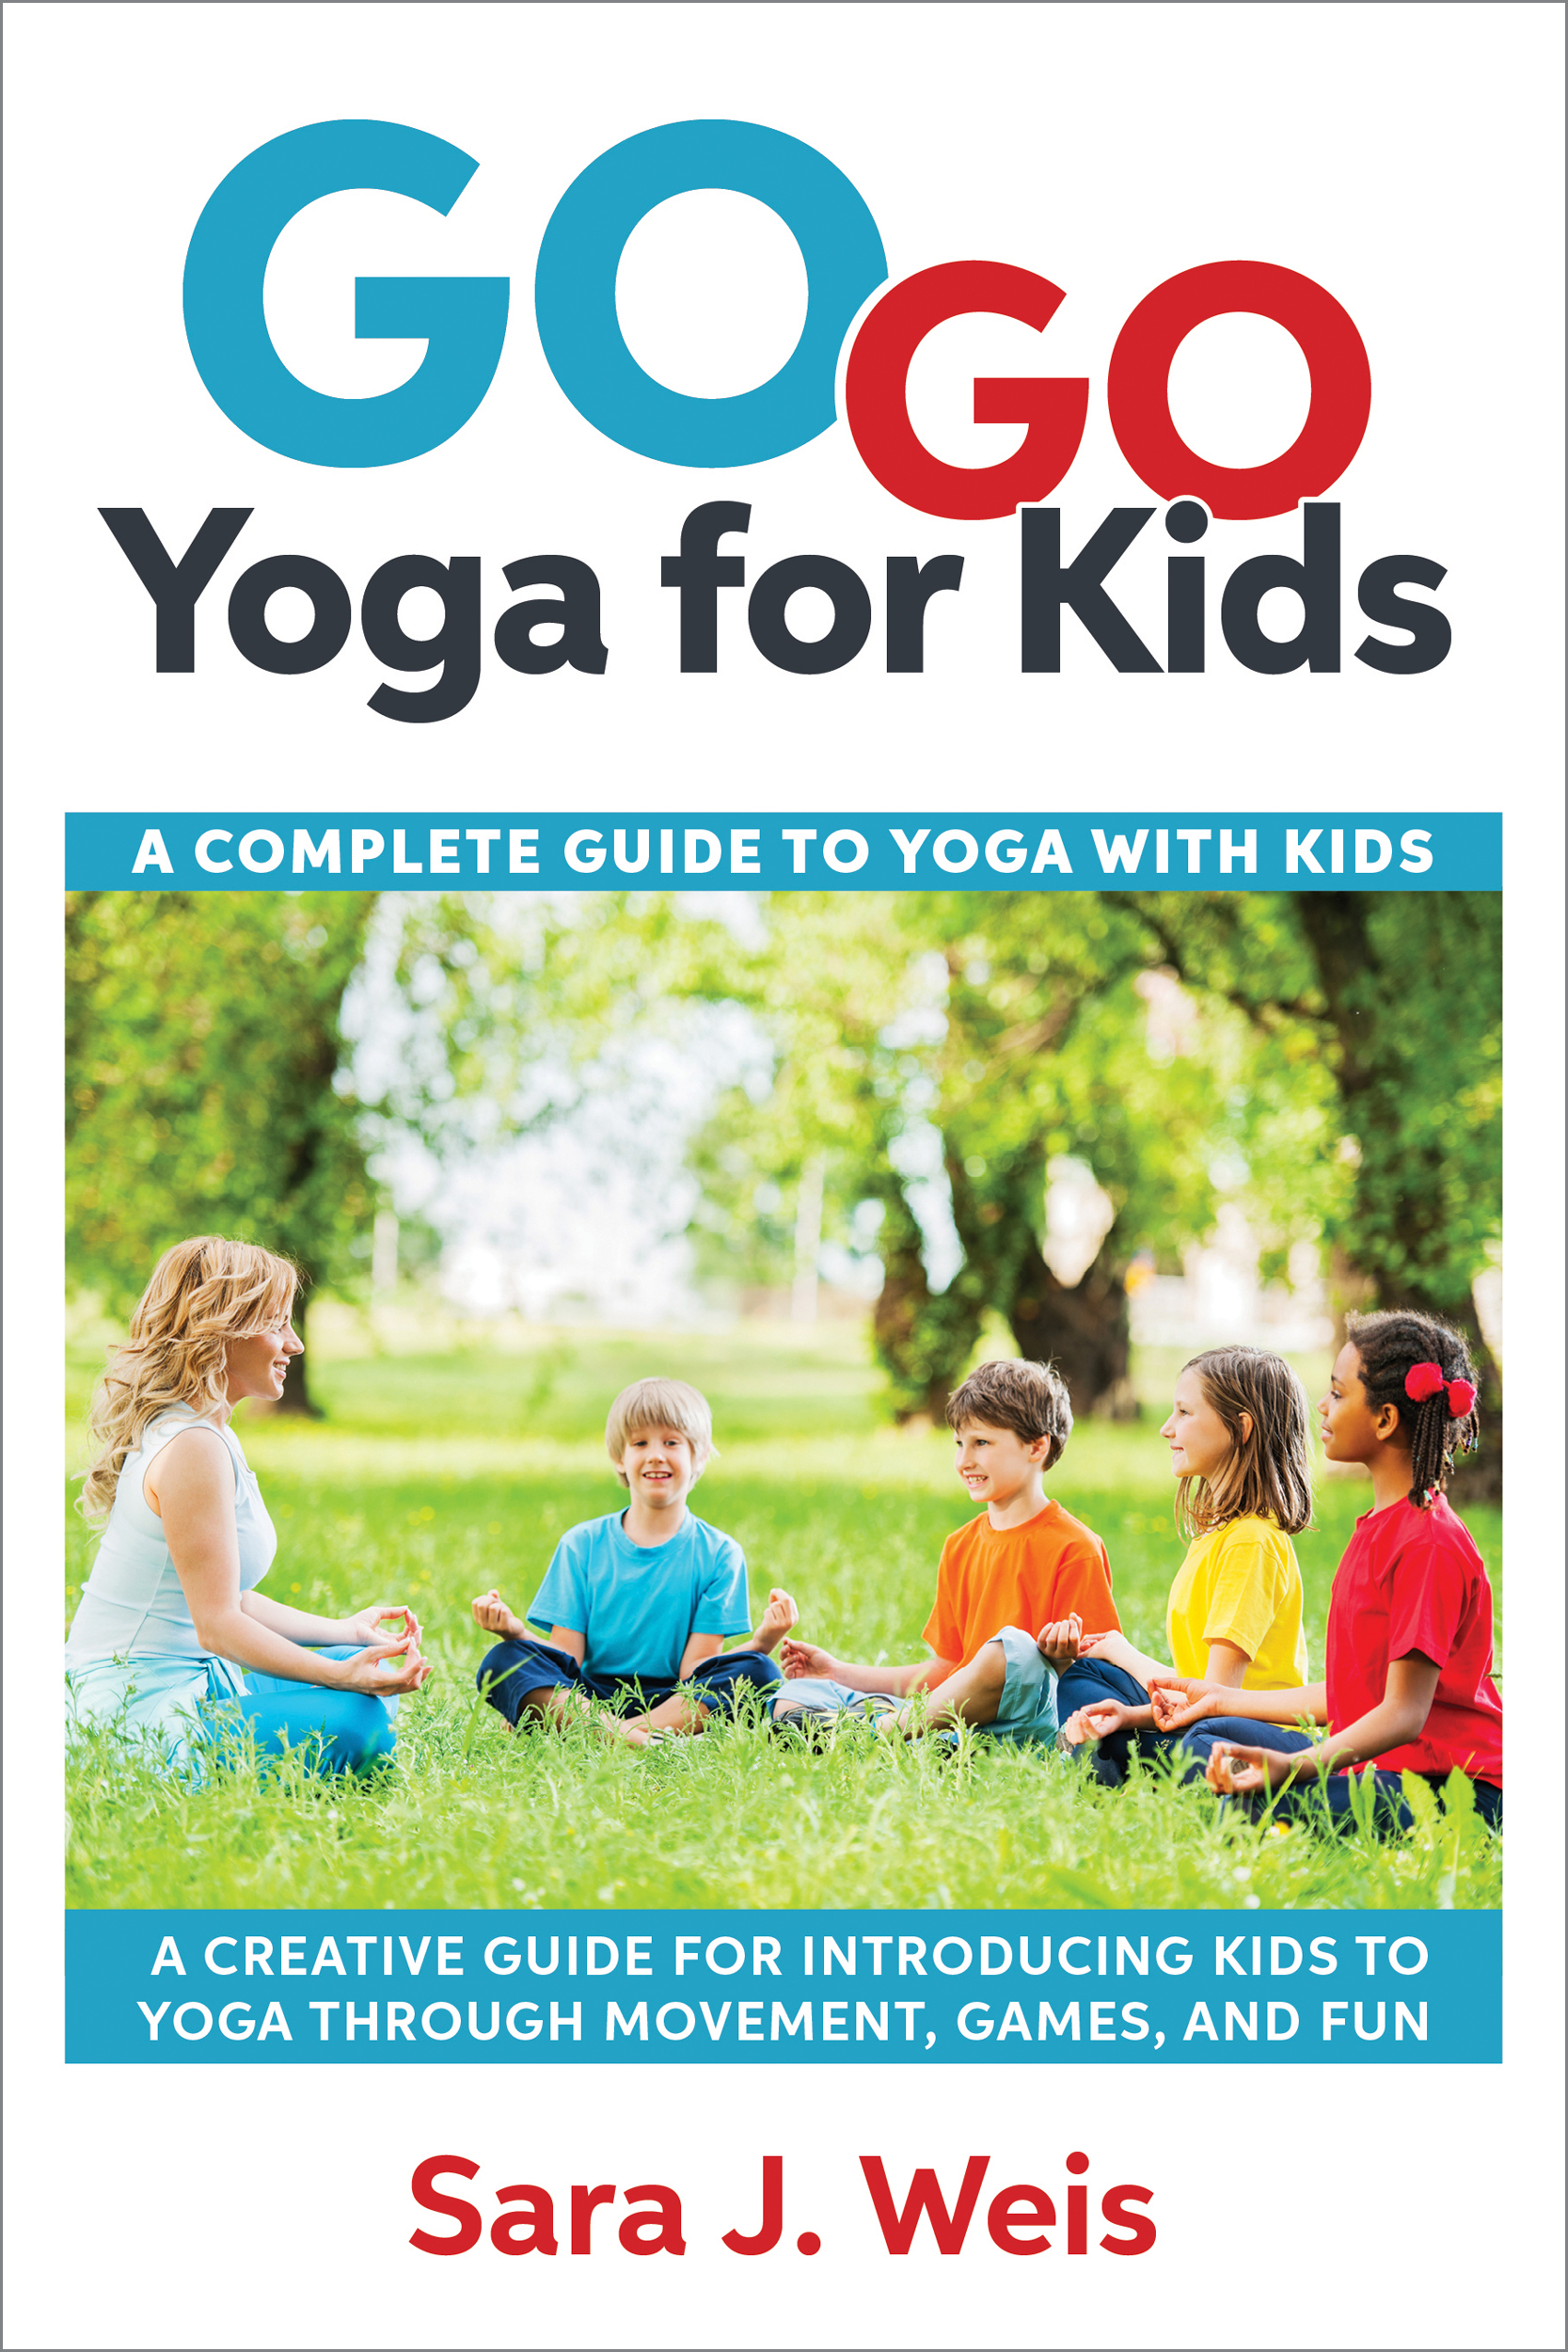 This book details everything about yoga for kids in an easy to follow, step-by-step format that will help you successfully teach yoga to kids of all ages.